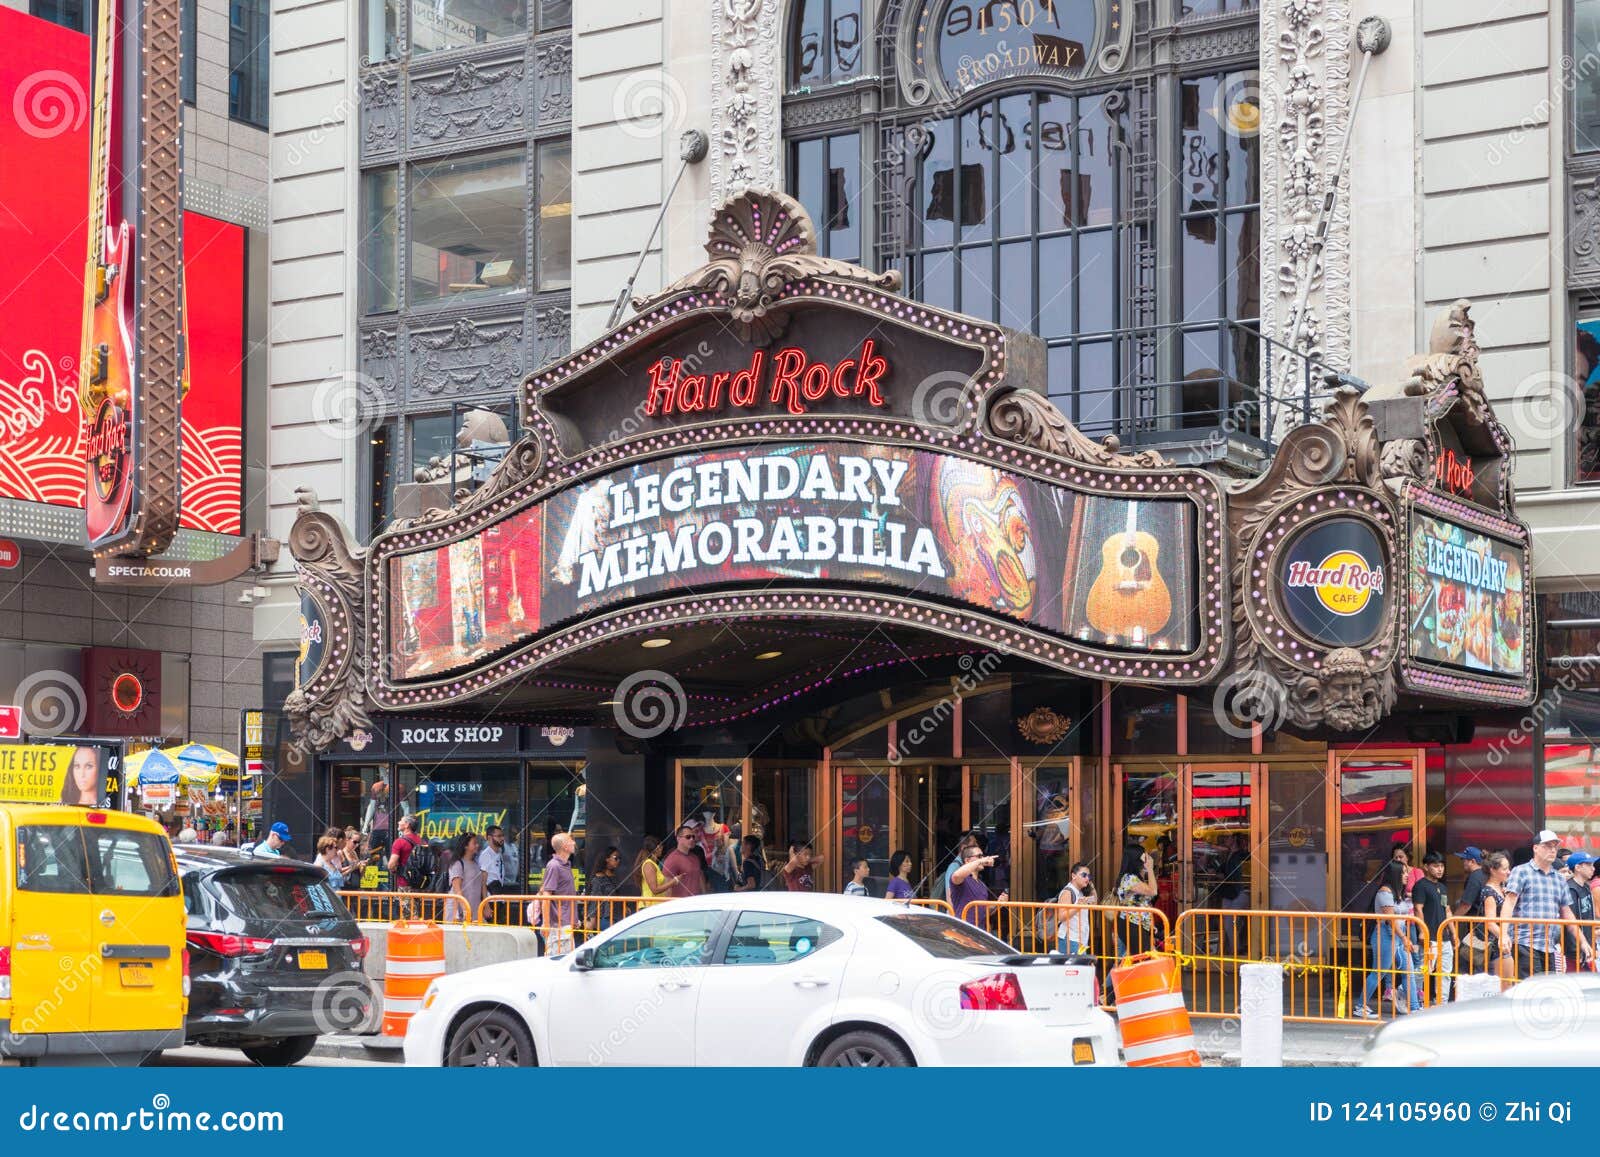 The Iconic Sign Of Hard Rock Cafe Restaurant Editorial Image Image Of Overseas Early